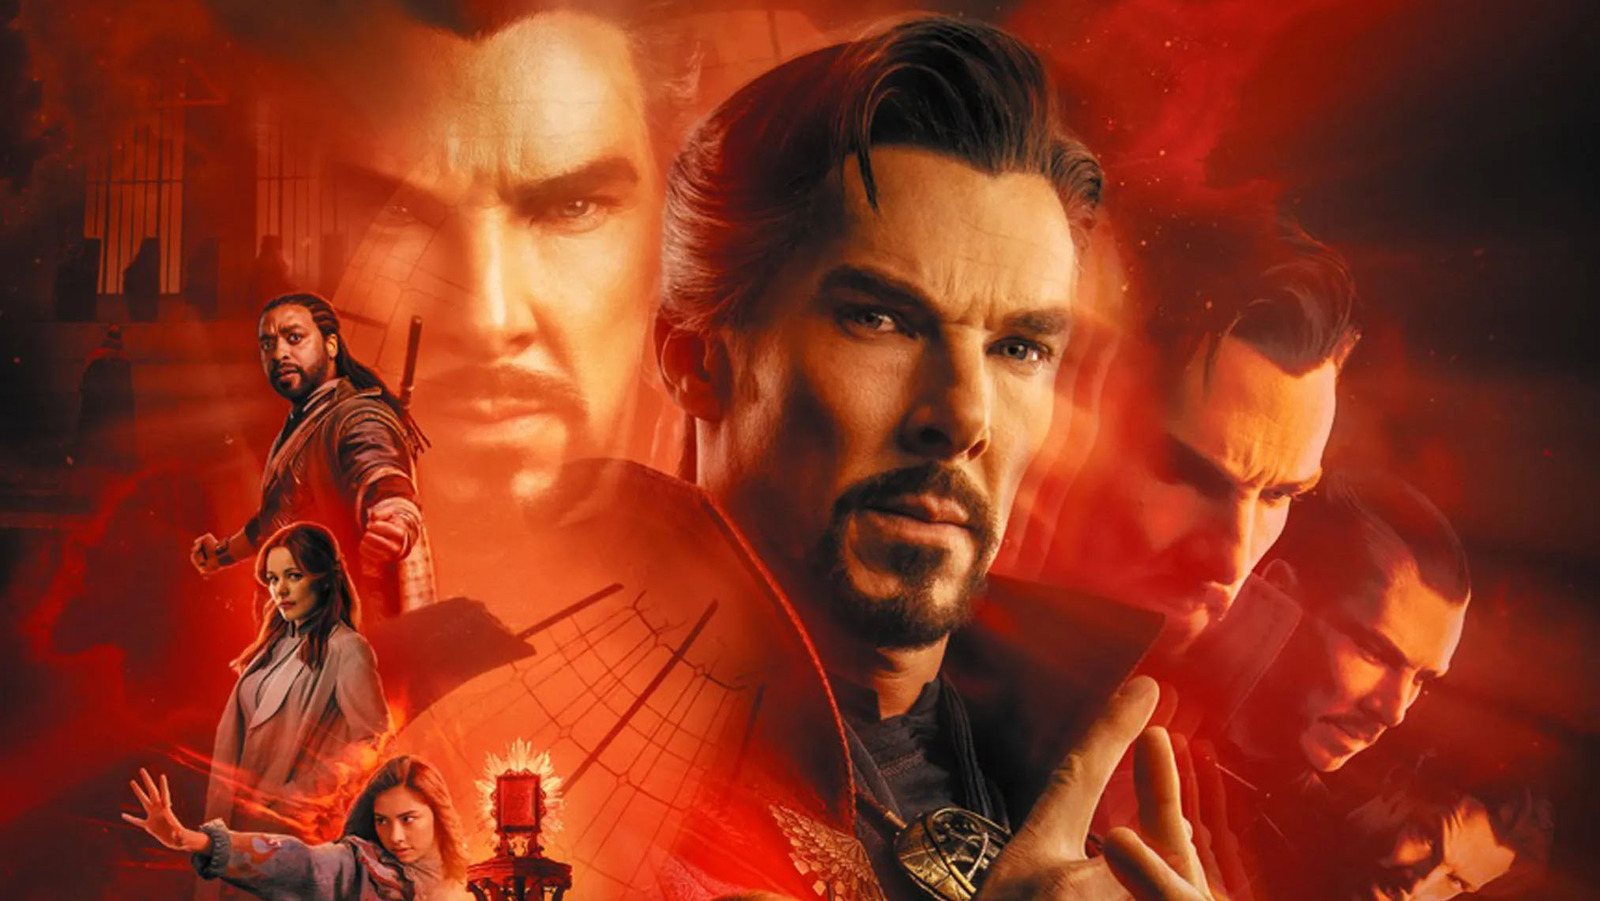 #Doctor Strange In The Multiverse Of Madness Conjures Up $185 Million Opening Weekend